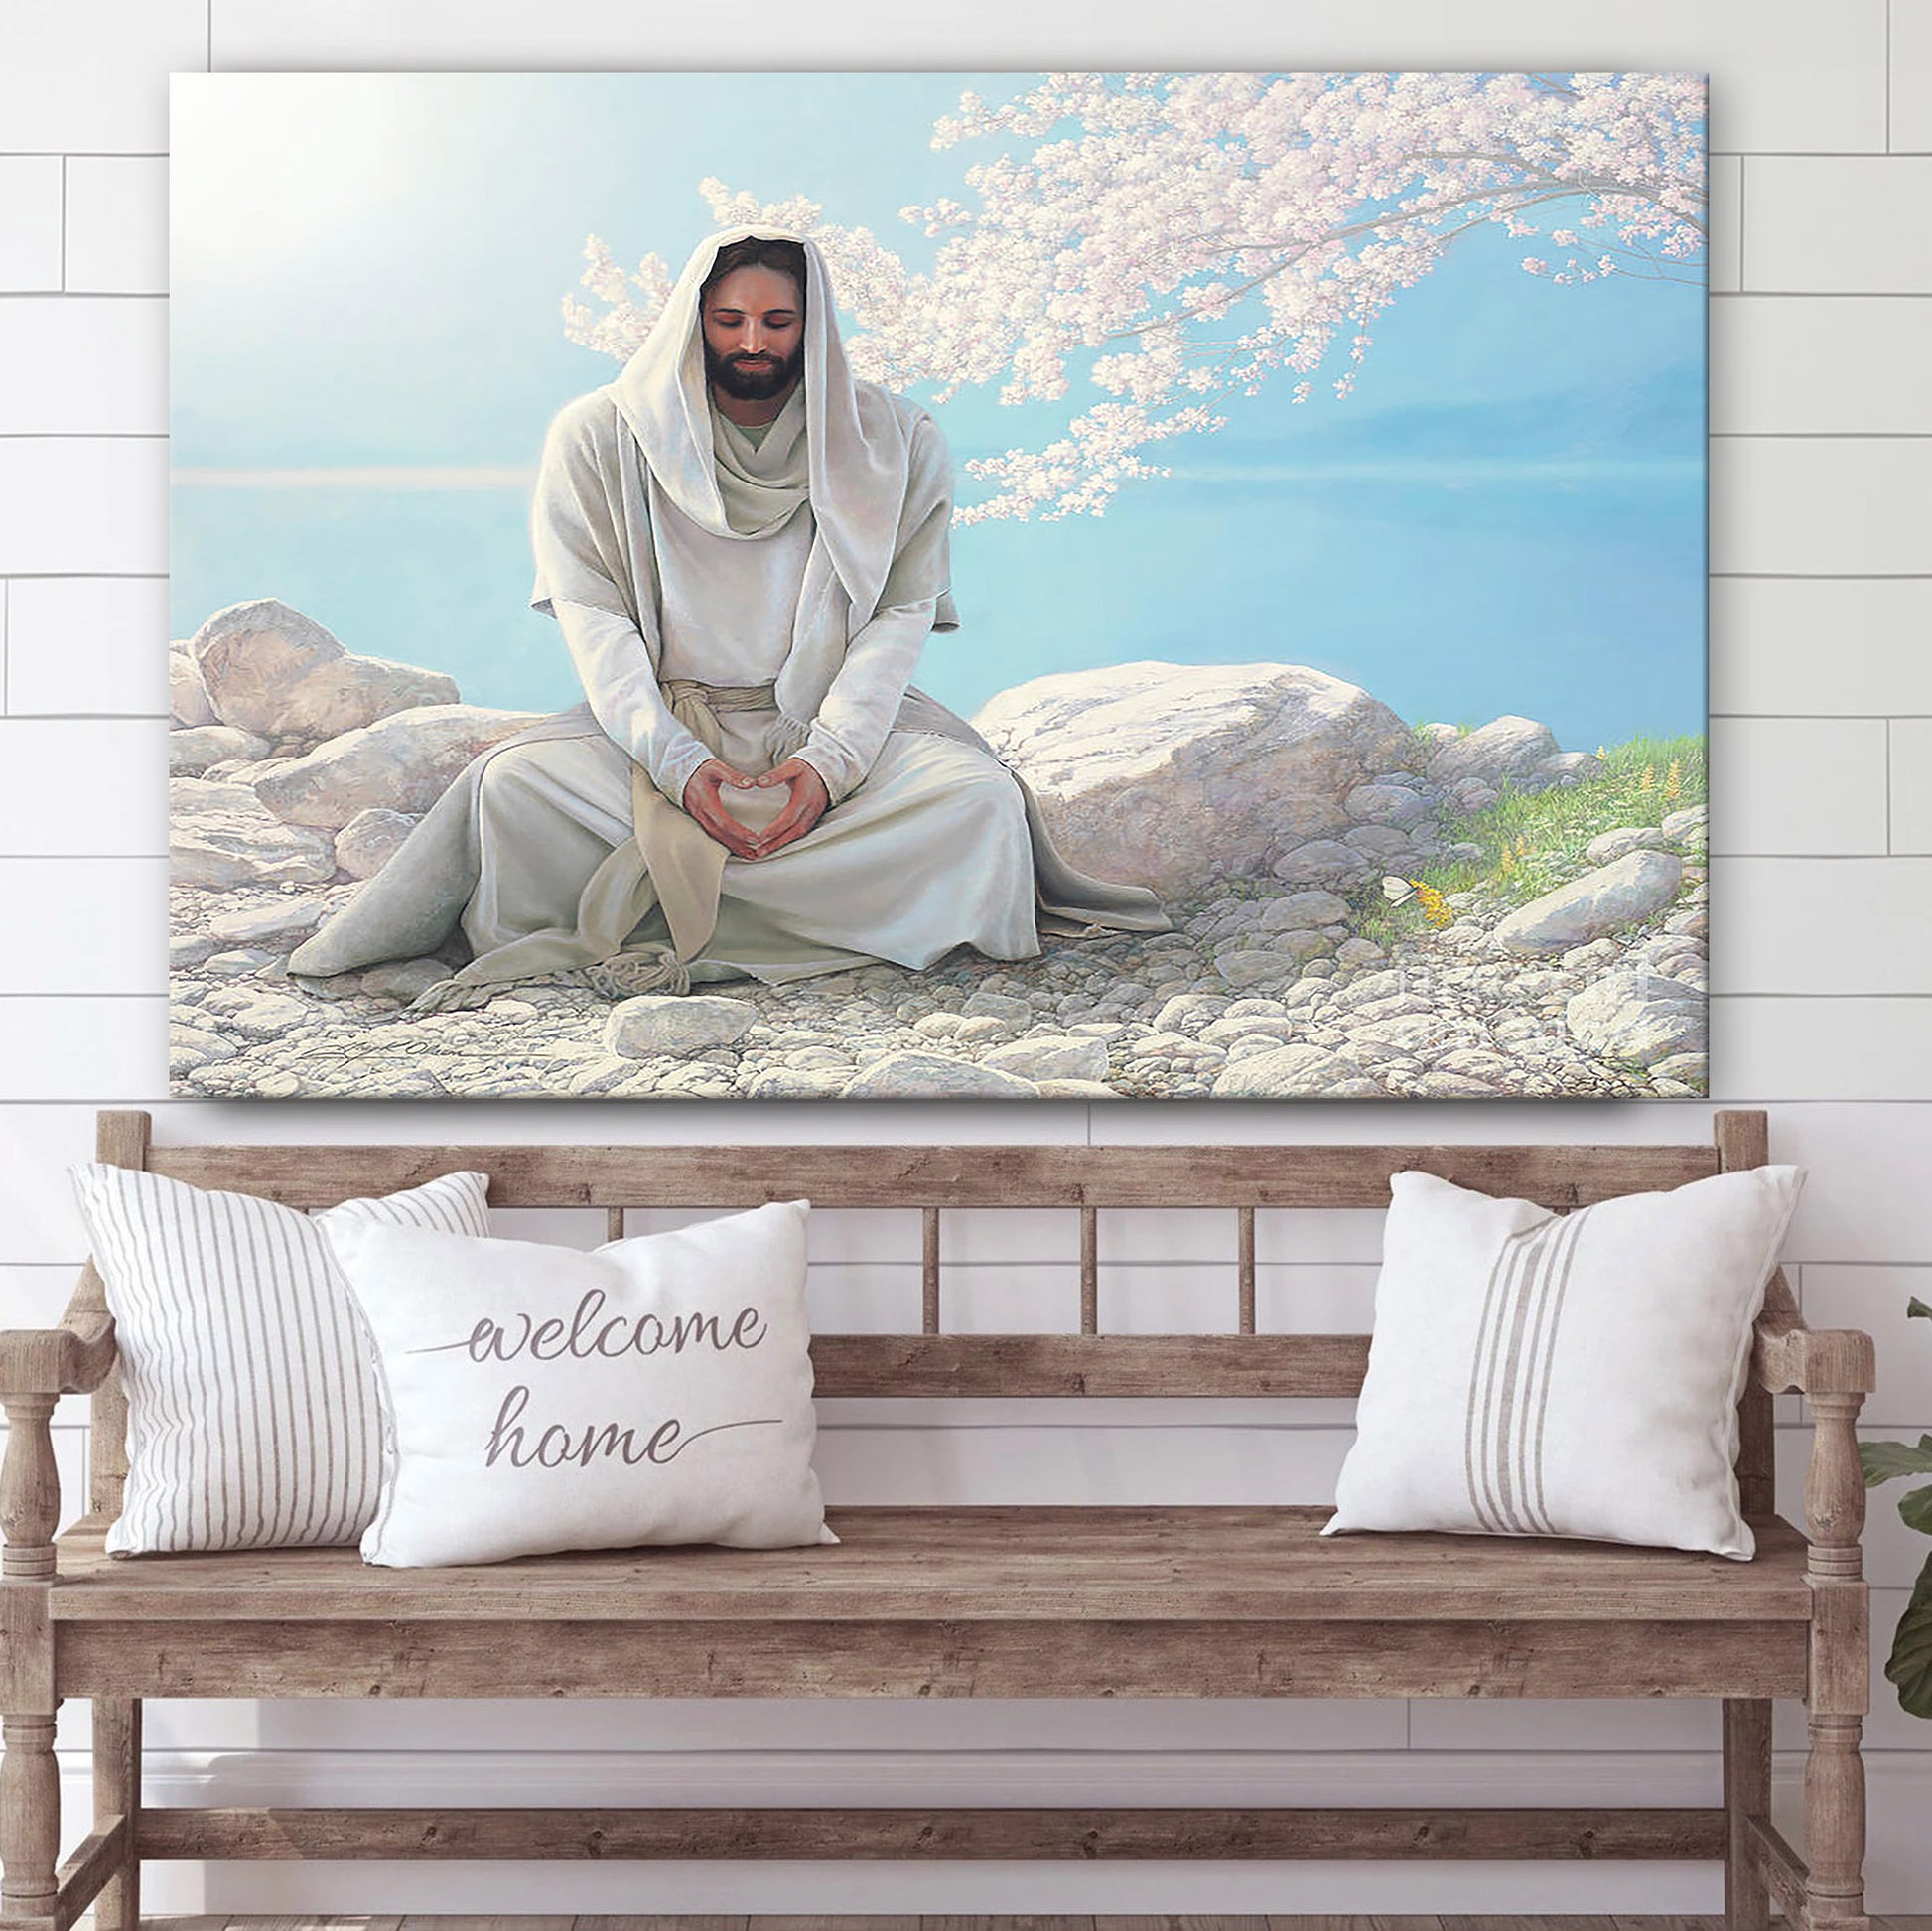 As I Have Loved You Canvas Pictures - Jesus Canvas Pictures - Christian Wall Art